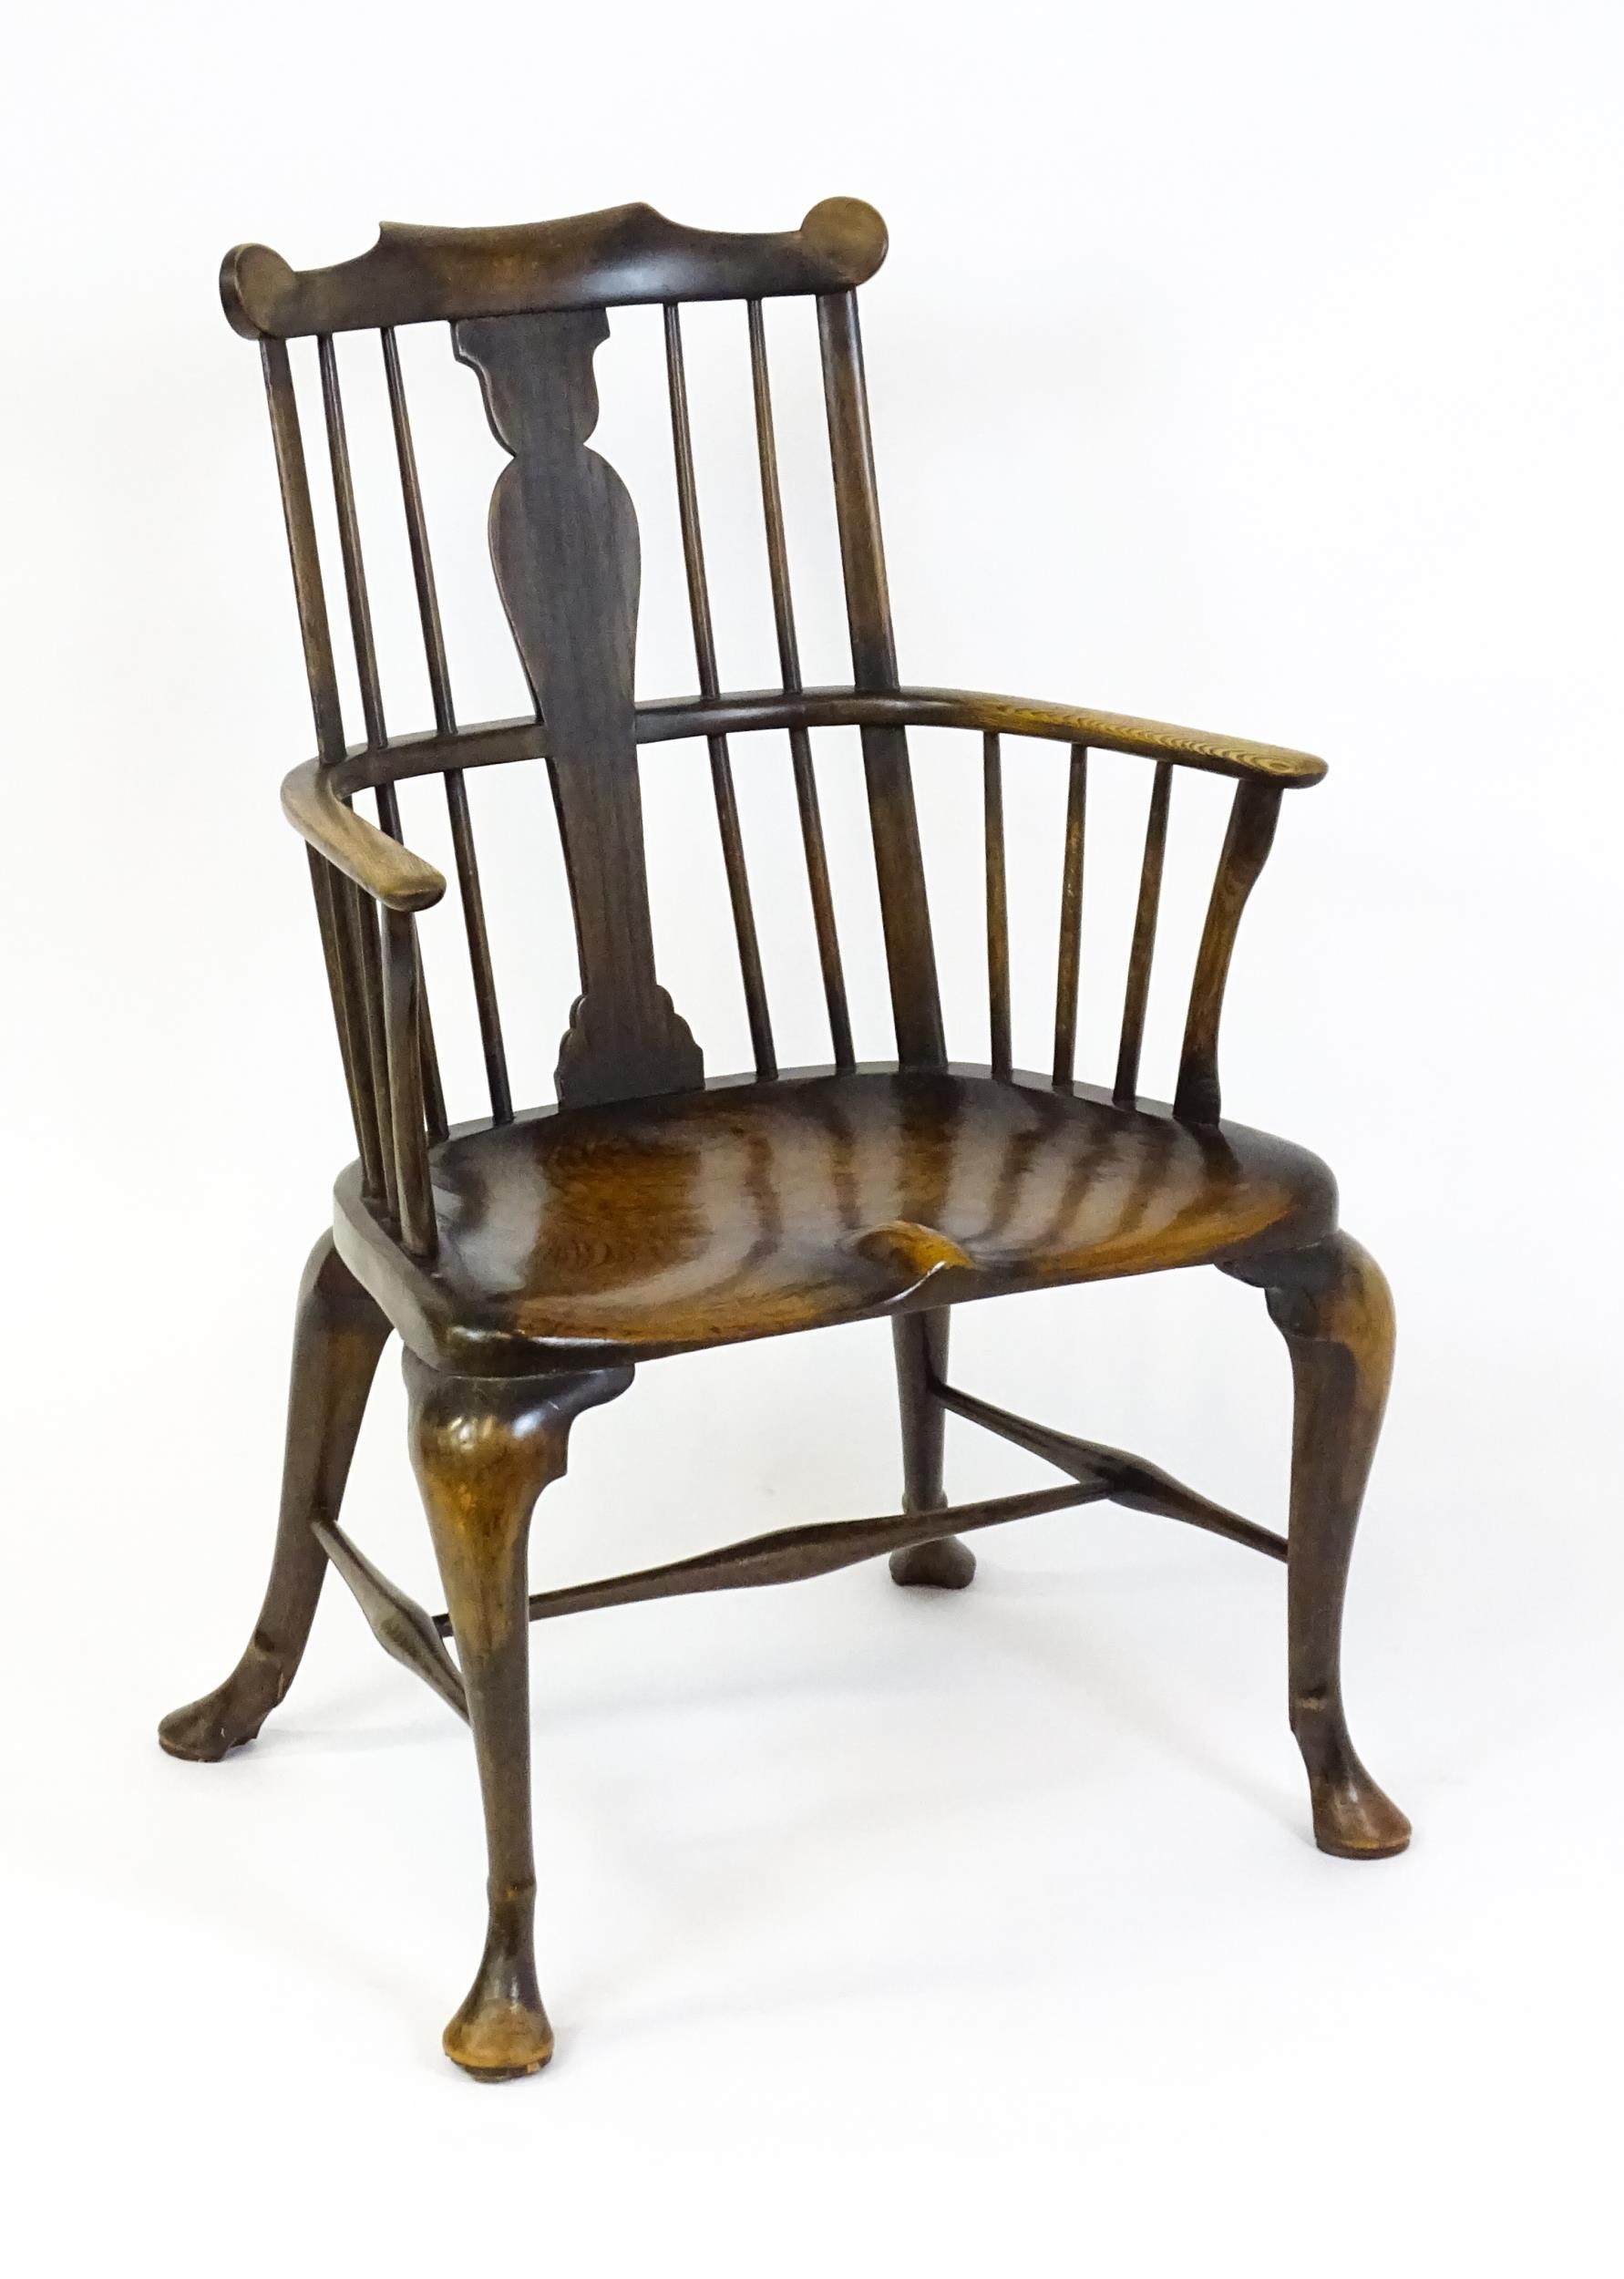 A late 19thC / early 20thC comb back Windsor chair with a vase shaped back splat and an unusually